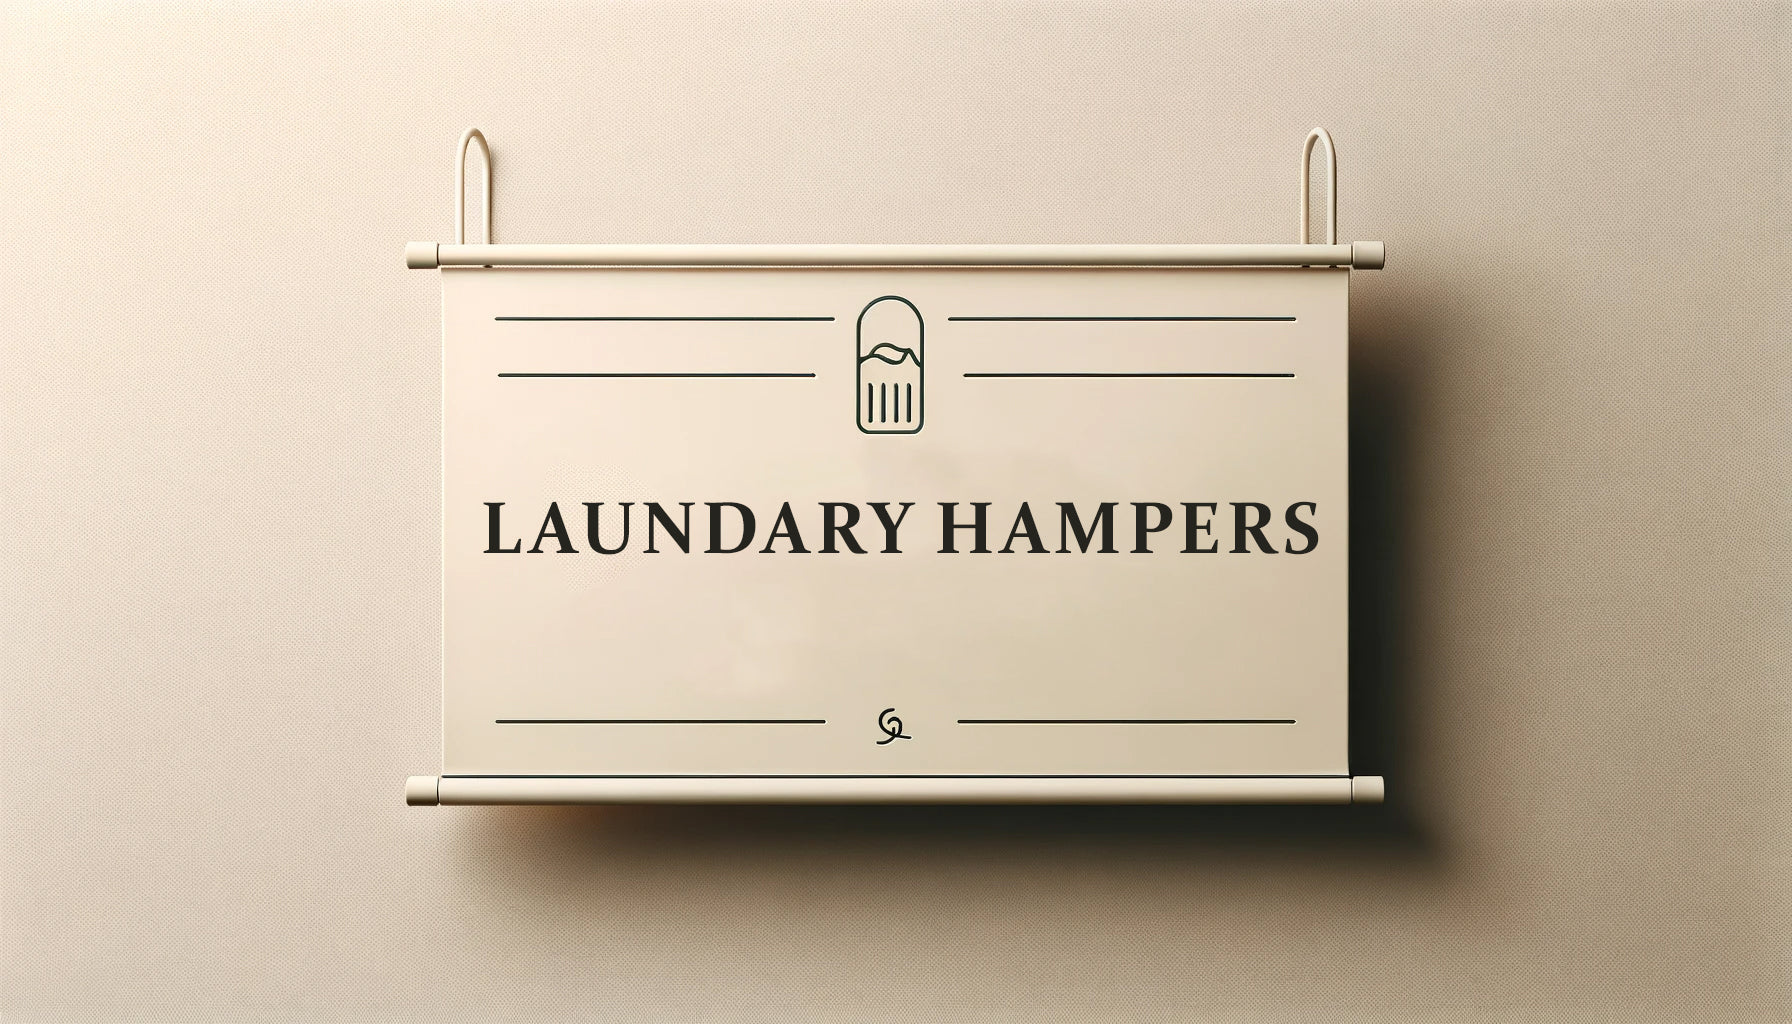 Revamp your laundry routine with our range of Functional and Stylish Laundry Hampers. Designed to make laundry organization effortless